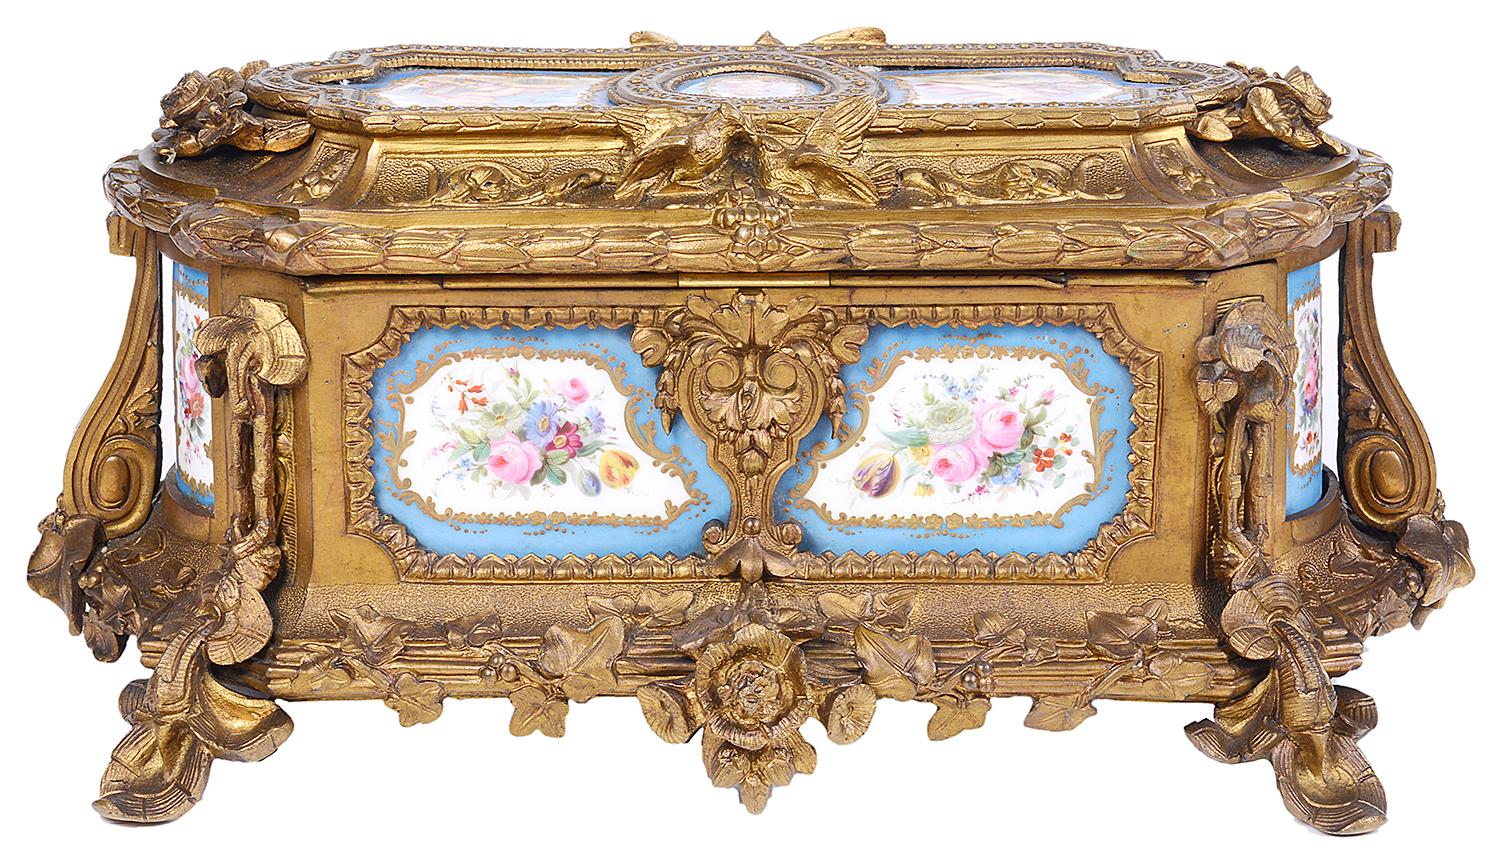 A good quality late 19th century French Sevres style porcelain and gilded ormolu casket, having three inset porcelain panels to the top depicting cherubs in the clouds with musical instruments and flowers, the panels to the sides of exotic birds and